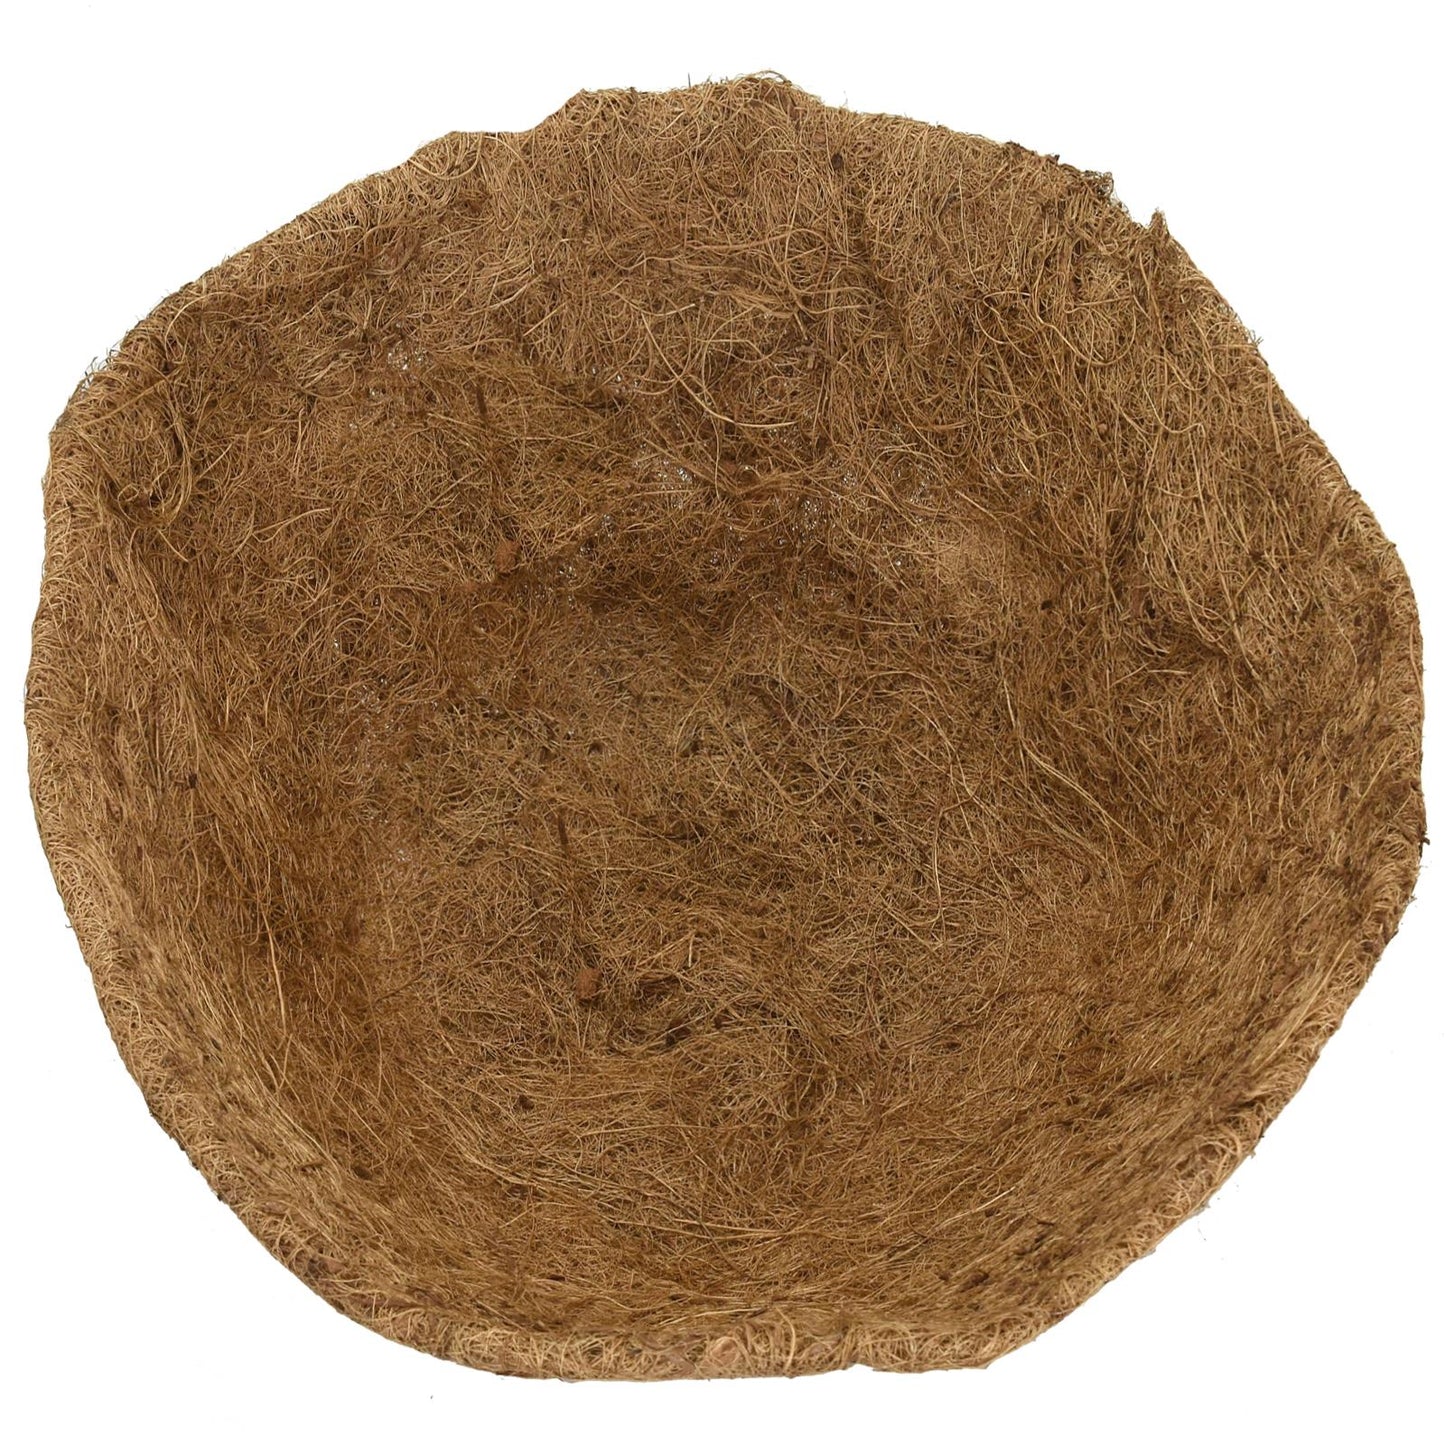 Eco-Friendly Coconut Fiber Liners for Planters